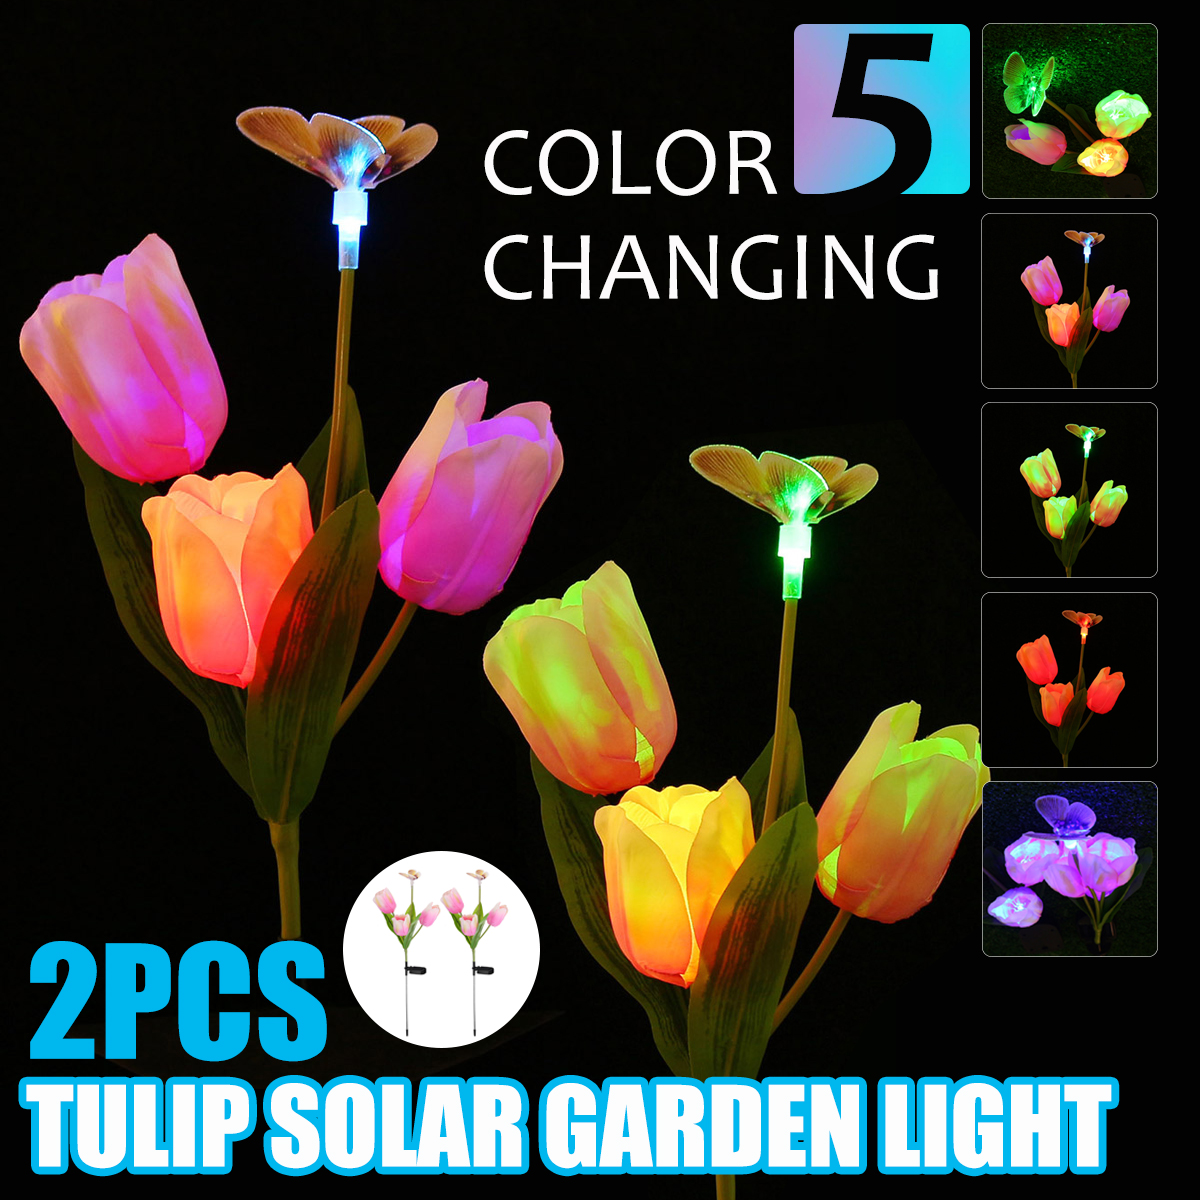 1PC2PCS-Solar-Powered-LED-Lawn-Light-Colorful-Flower-Tulip-Outdoor-Yard-Garden-Lamp-for-Outdoor-Home-1722987-1